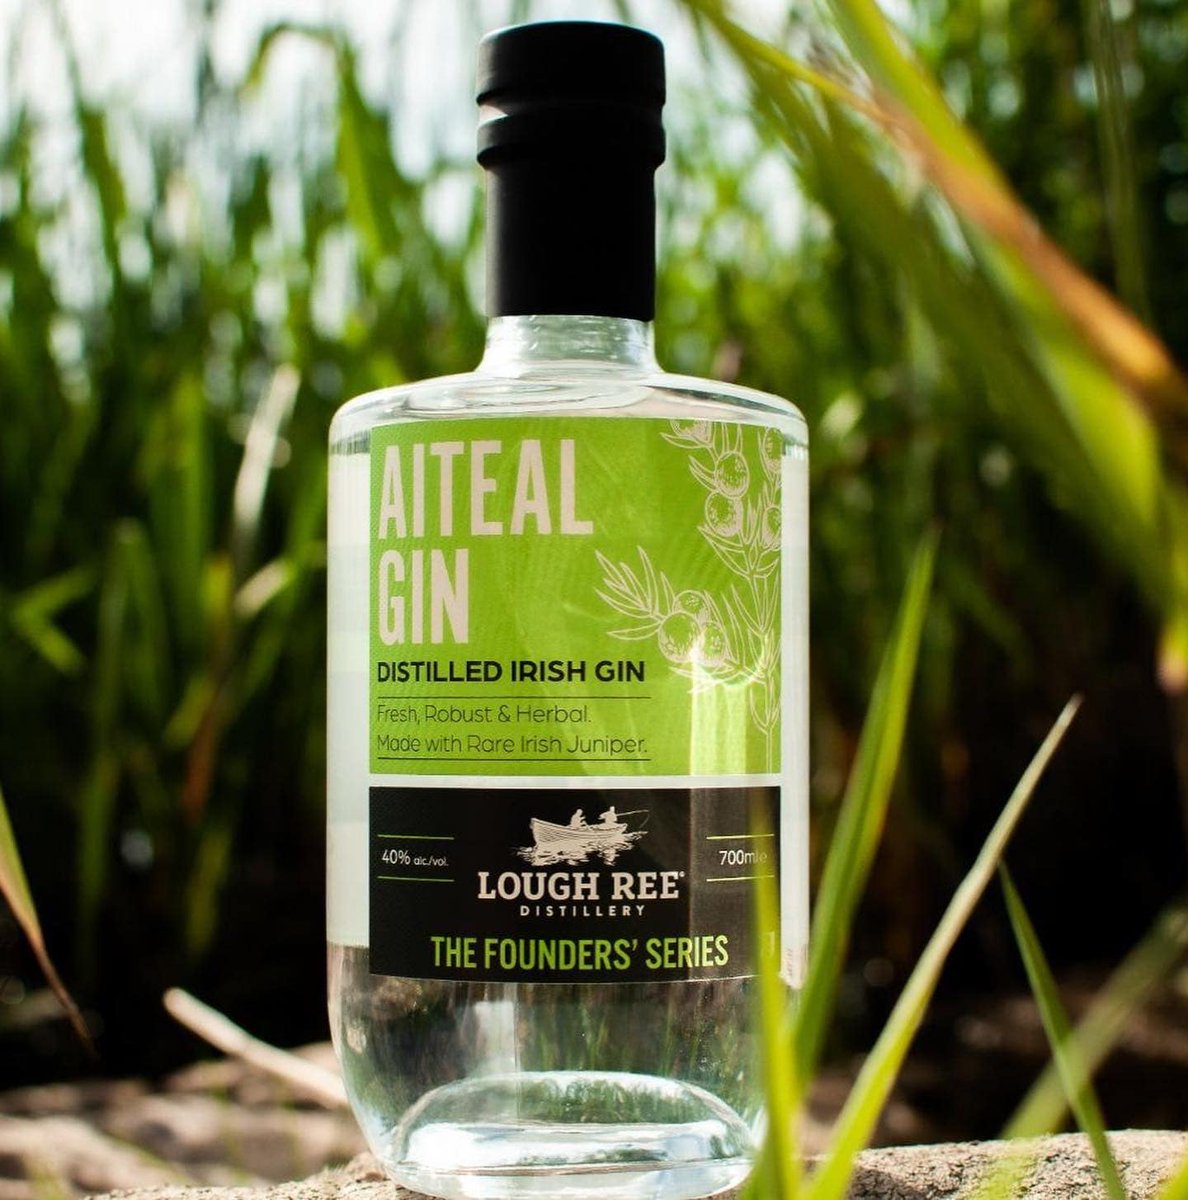 Try a Gin unlike any other this Summer. ☀️ We've got expressions from all over the world, with the most experimental twists - from peat as a botanical, to a finish in a Islay whisky cask.  Shop all Gin here: whiskyshop.com/gin